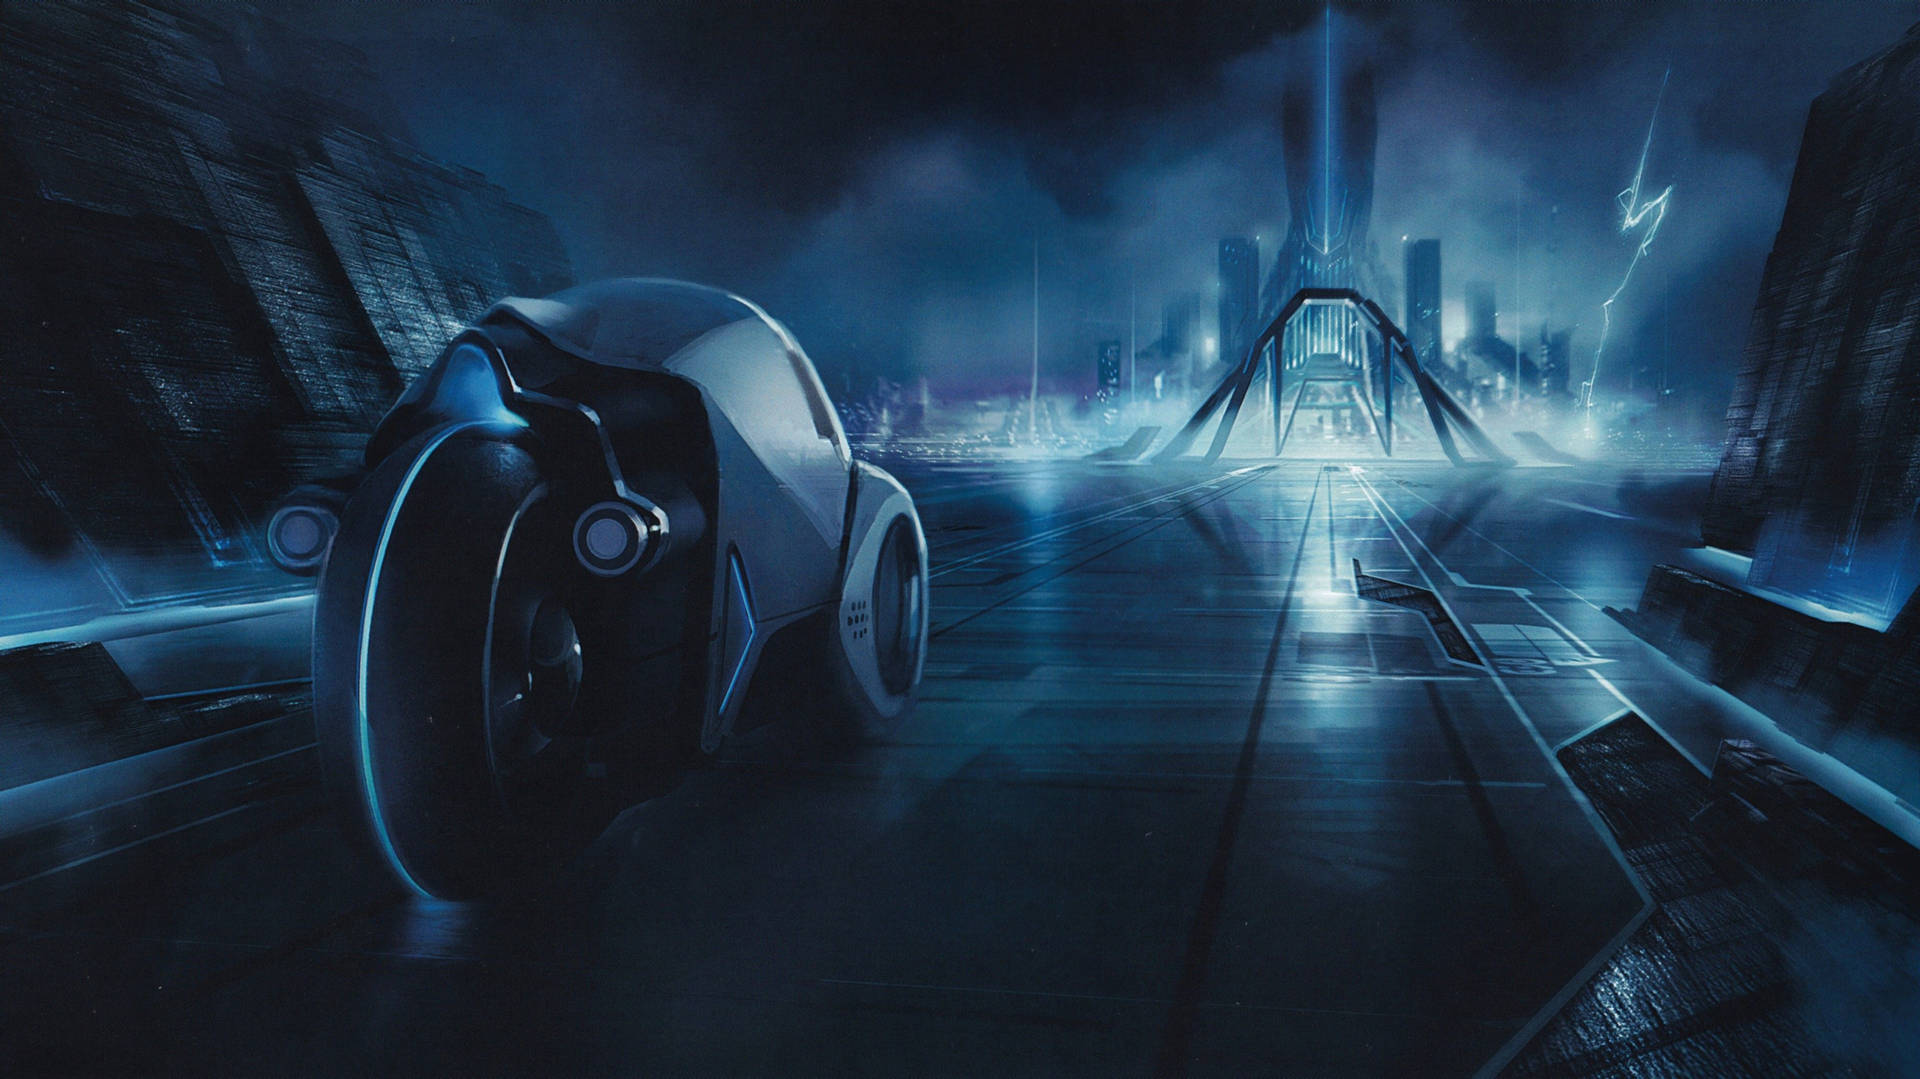 Tron Movie Digital Cover Background